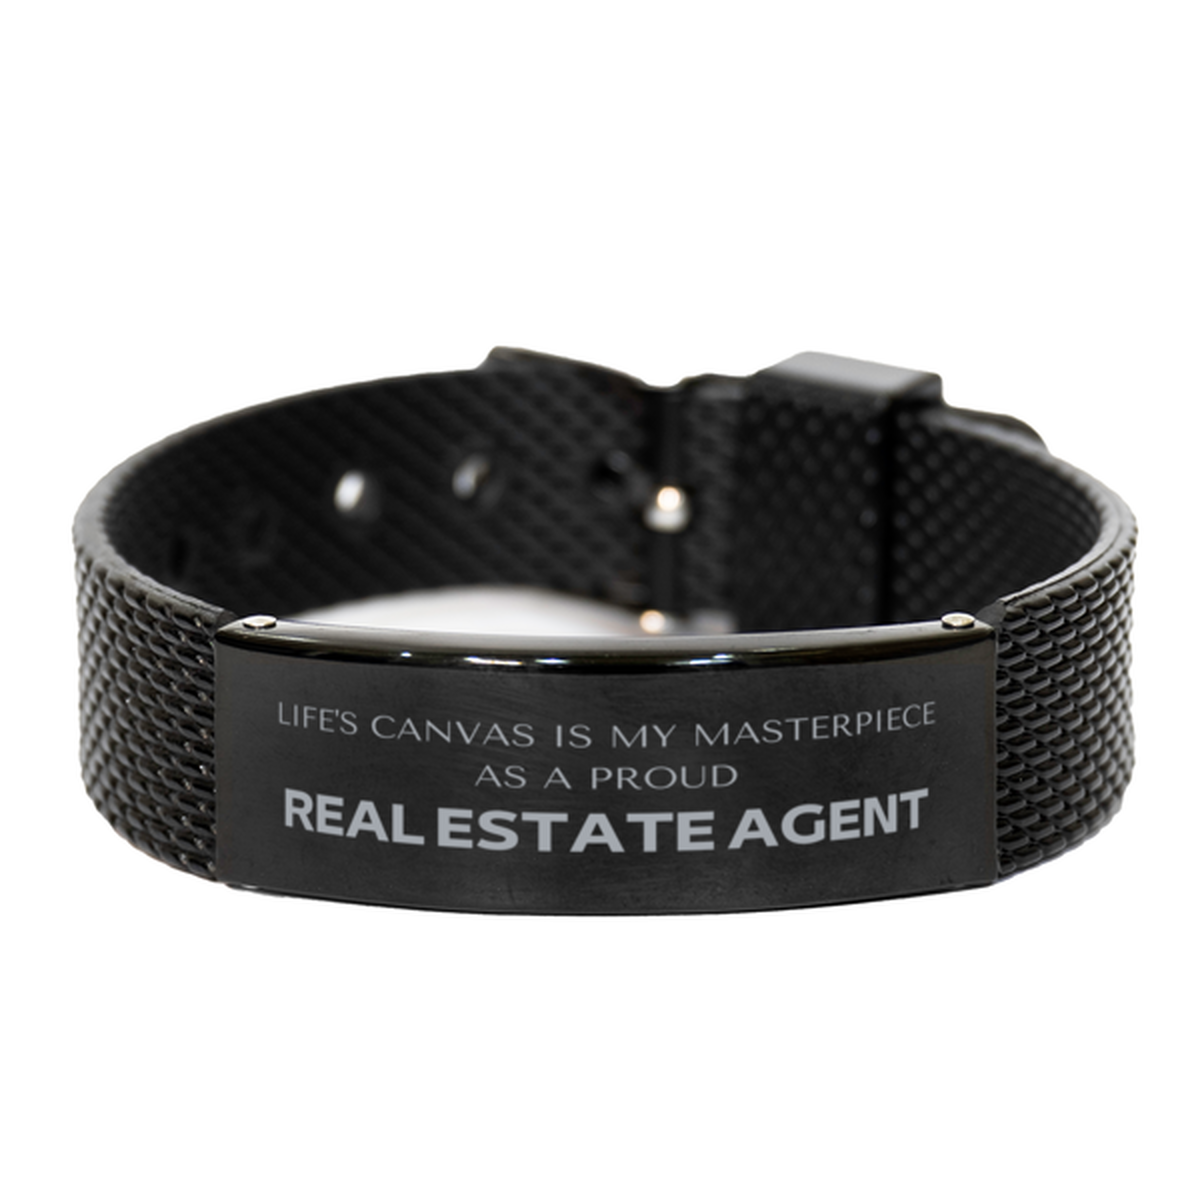 Proud Real Estate Agent Gifts, Life's canvas is my masterpiece, Epic Birthday Christmas Unique Black Shark Mesh Bracelet For Real Estate Agent, Coworkers, Men, Women, Friends